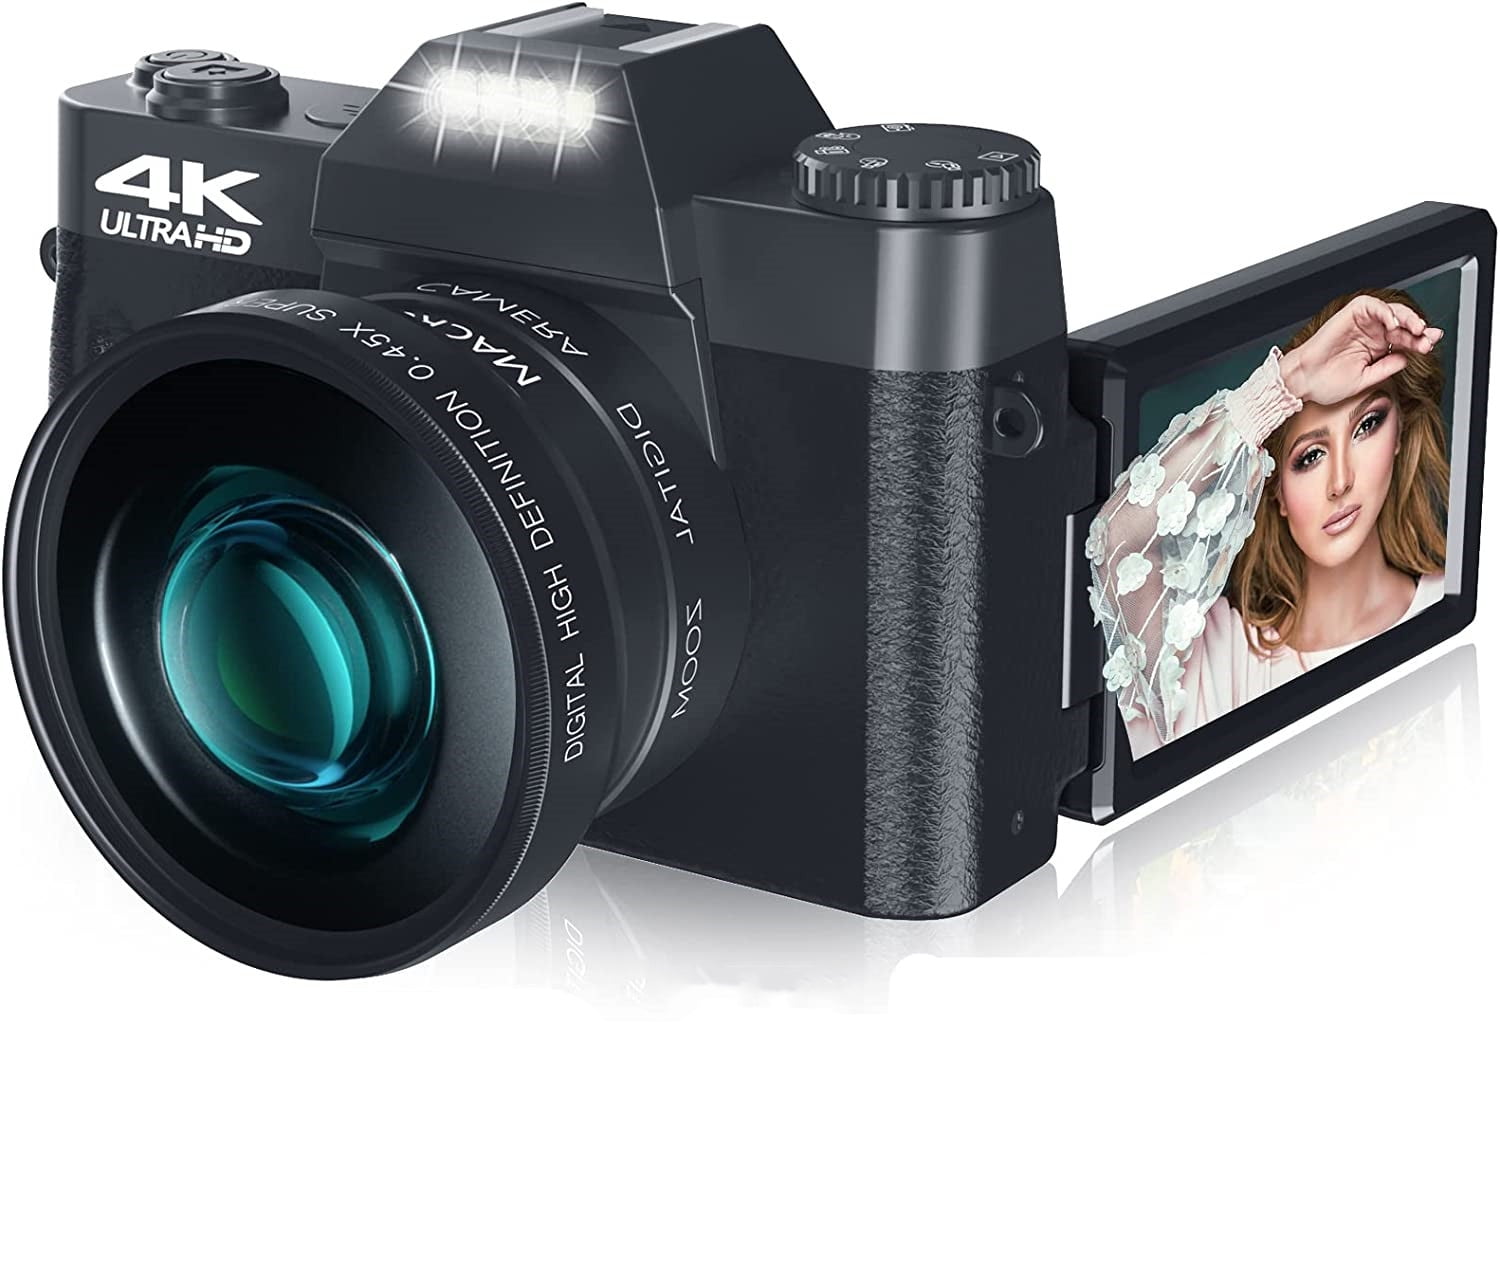 YEEIN Camcorders Video Camera 4k with 3 Touch Screen and 32G Card, WiFi  Digital Camera, 18X Digital Zoom, Vlogging Camera for  Video